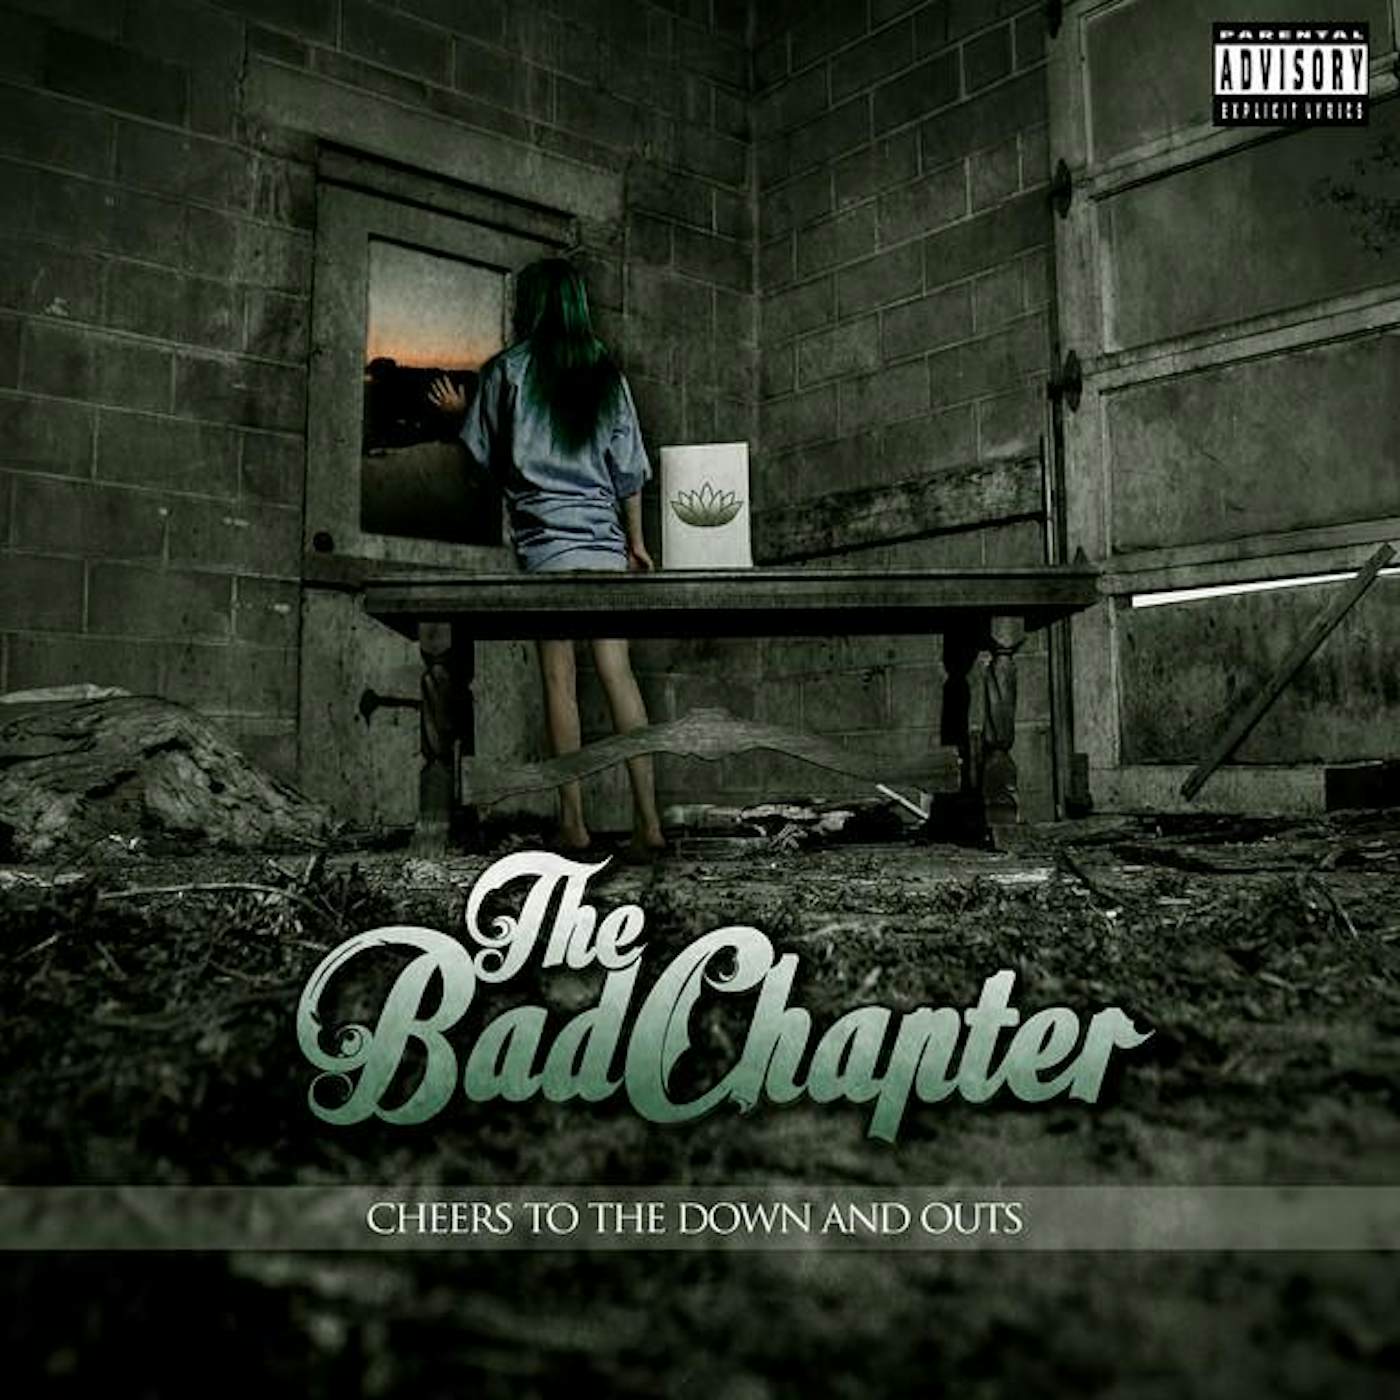 The Bad Chapter